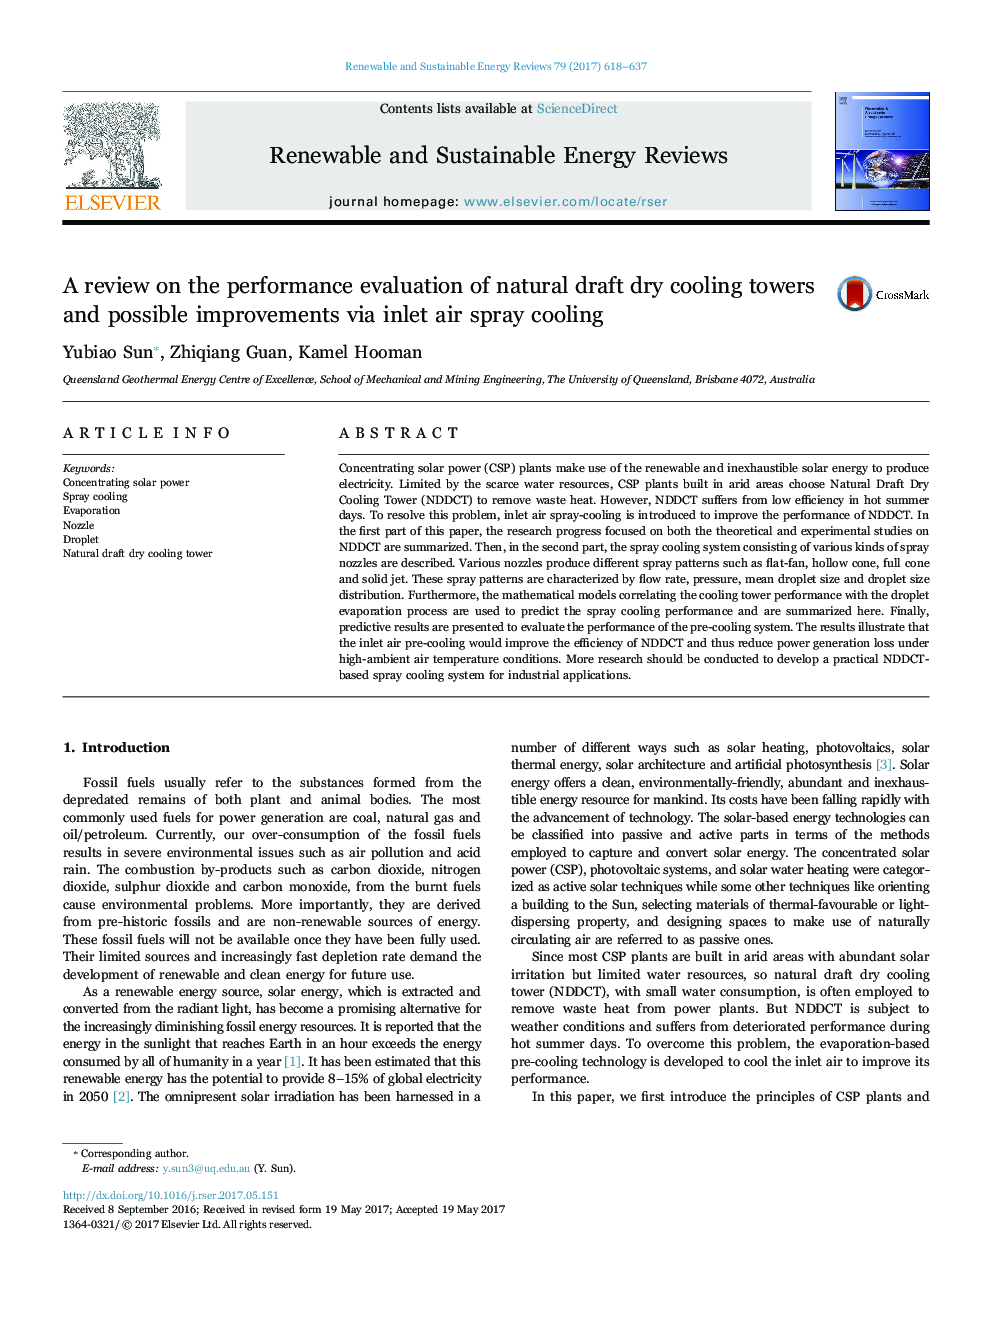 A review on the performance evaluation of natural draft dry cooling towers and possible improvements via inlet air spray cooling